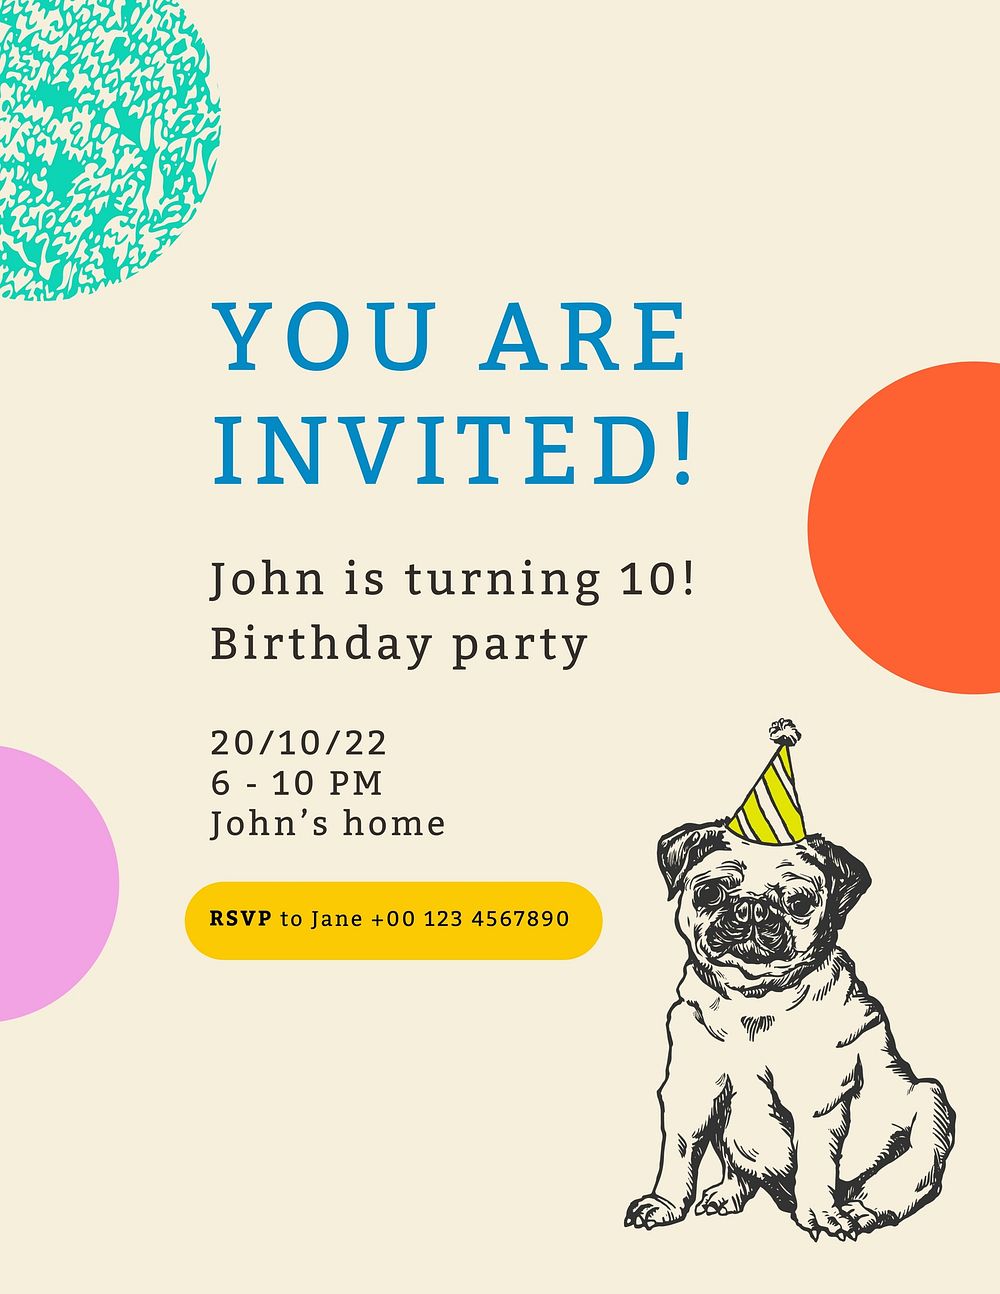 Birthday party invitation flyer, dog editable design remixed from artworks by Moriz Jung